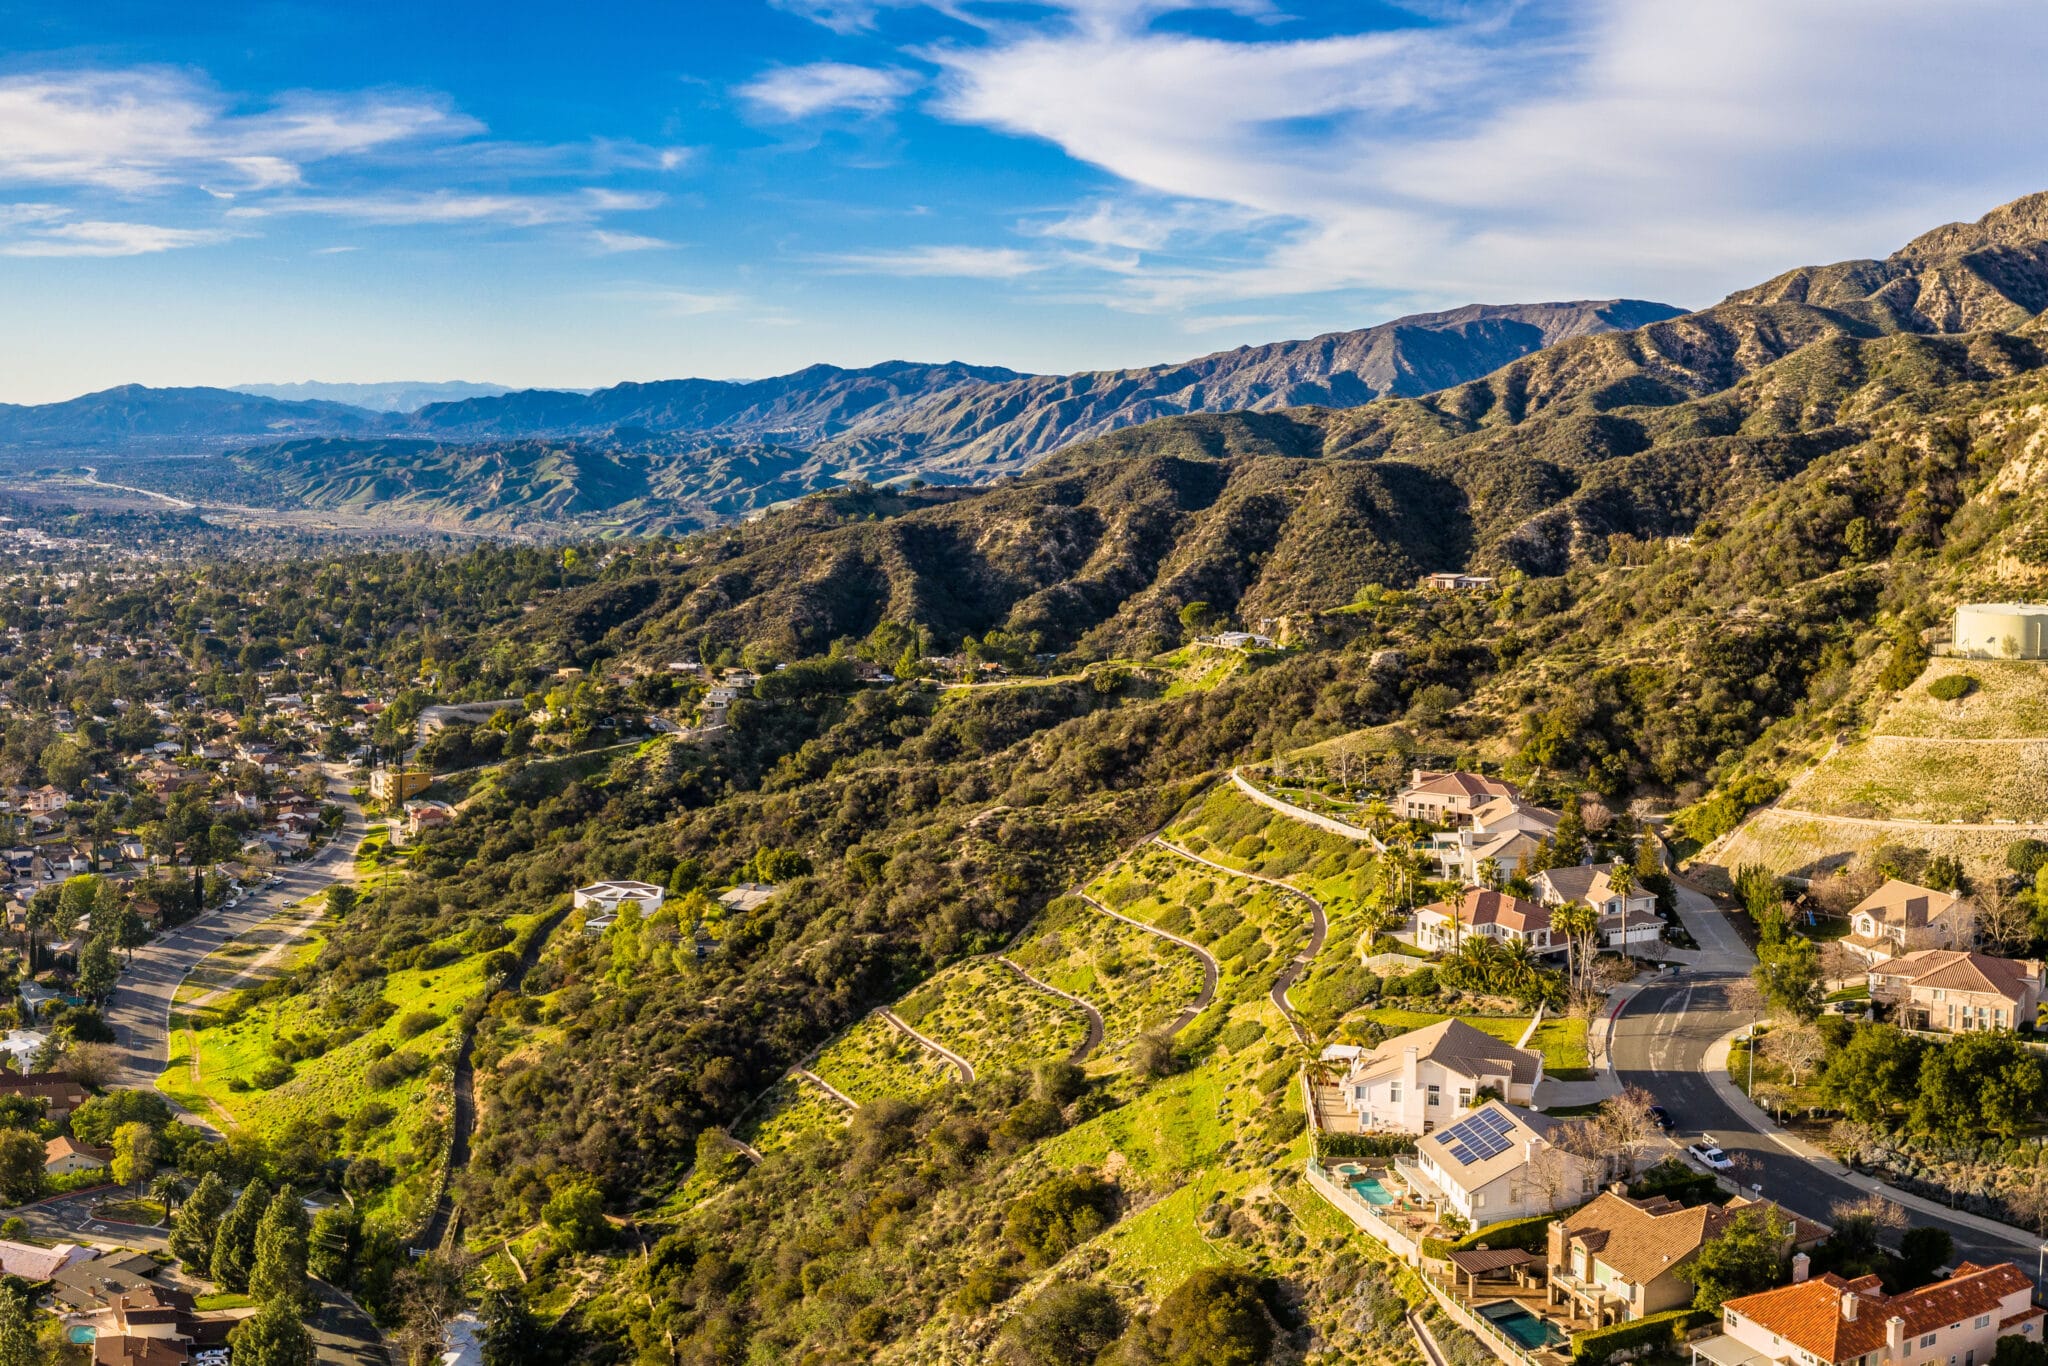 Alhambra has a population of 82,504 and is located in the western San Gabriel Valley region of Los Angeles County.